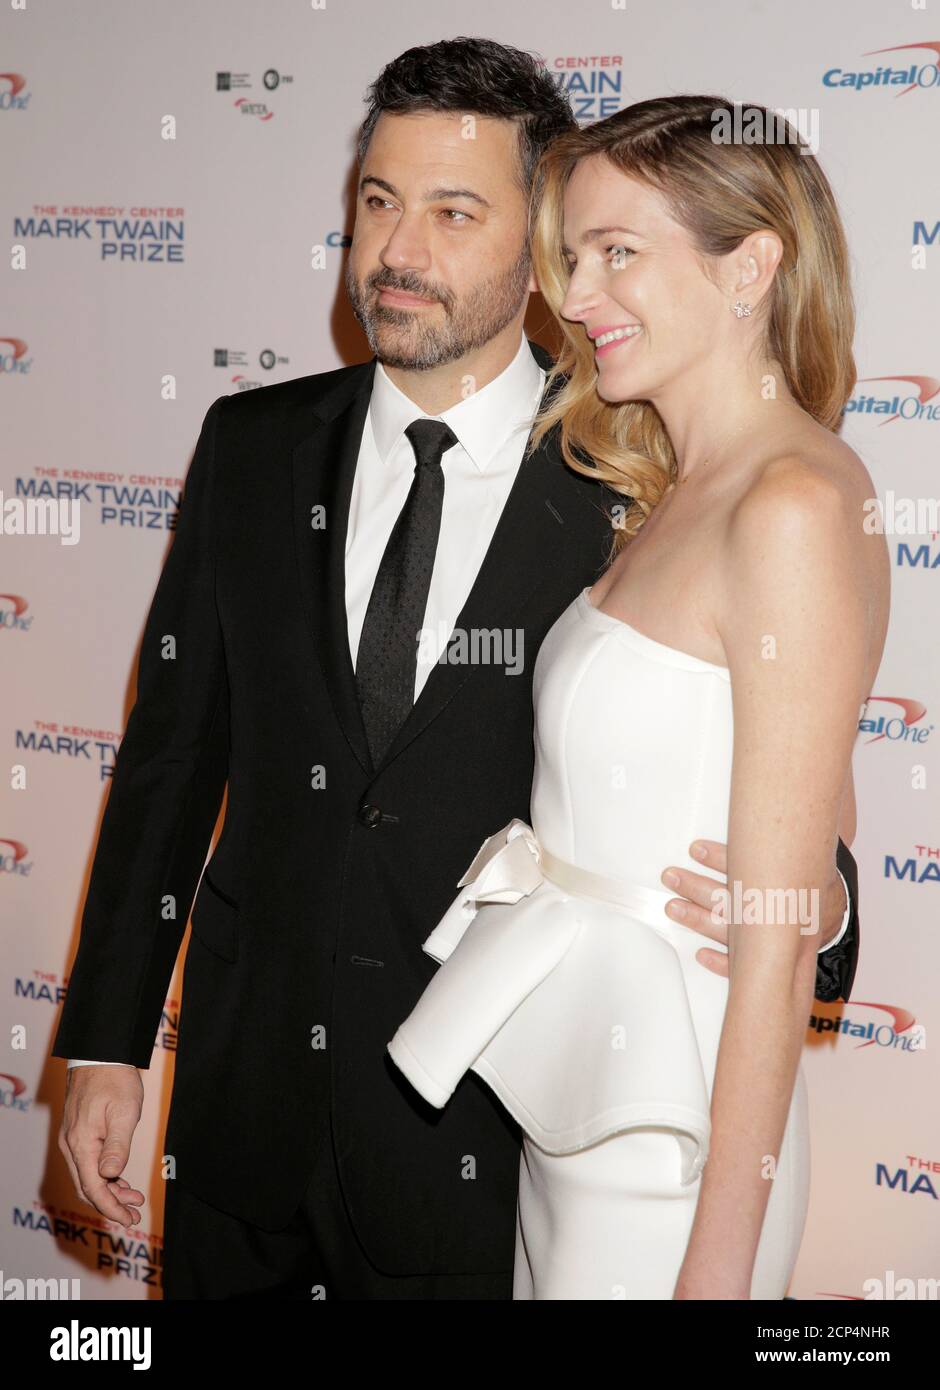 Comedian Jimmy Kimmel and his wife Molly McNearney arrive at the 19th annual Mark Twain Prize for American Humor honoring Bill Murray at the Kennedy Center in Washington, U.S., October 23, 2016.      REUTERS/Joshua Roberts Stock Photo